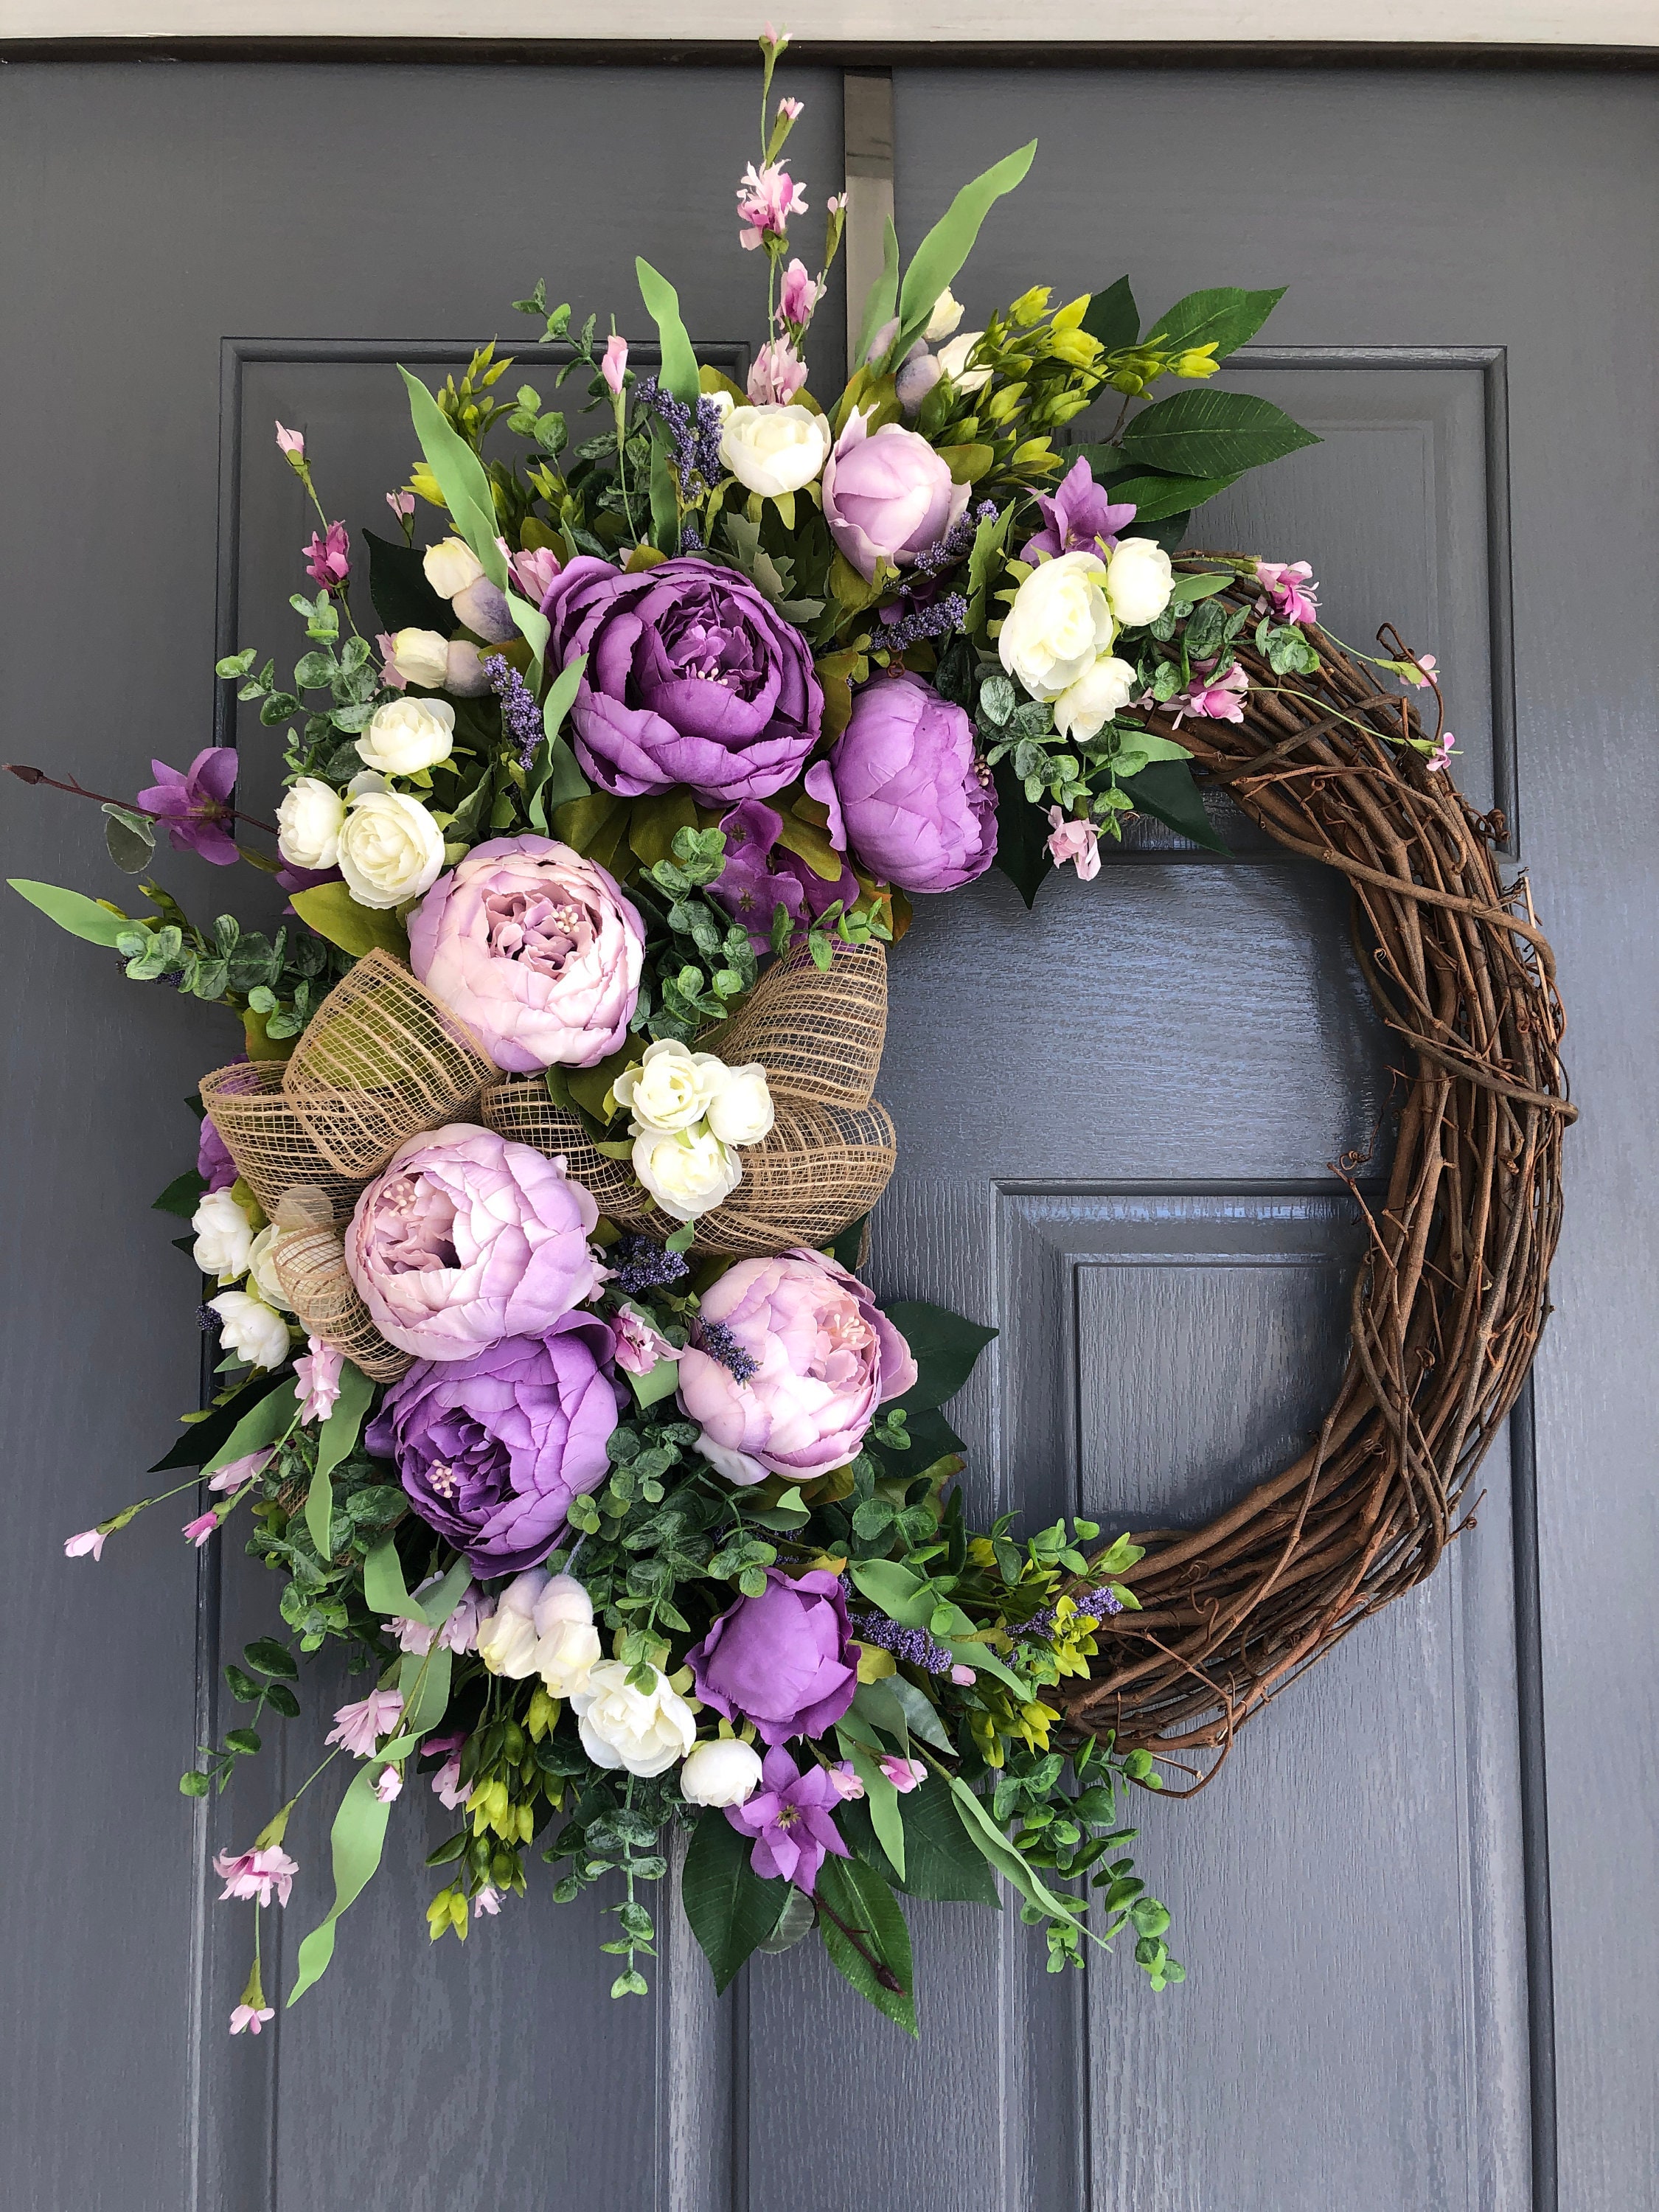 Spring Wreath, Spring Lavender Wreath, Purple Wreath, Mother's Day Wreath,  Houswarming Gift, Wreath for Spring and Summer, Front Wreath 2023